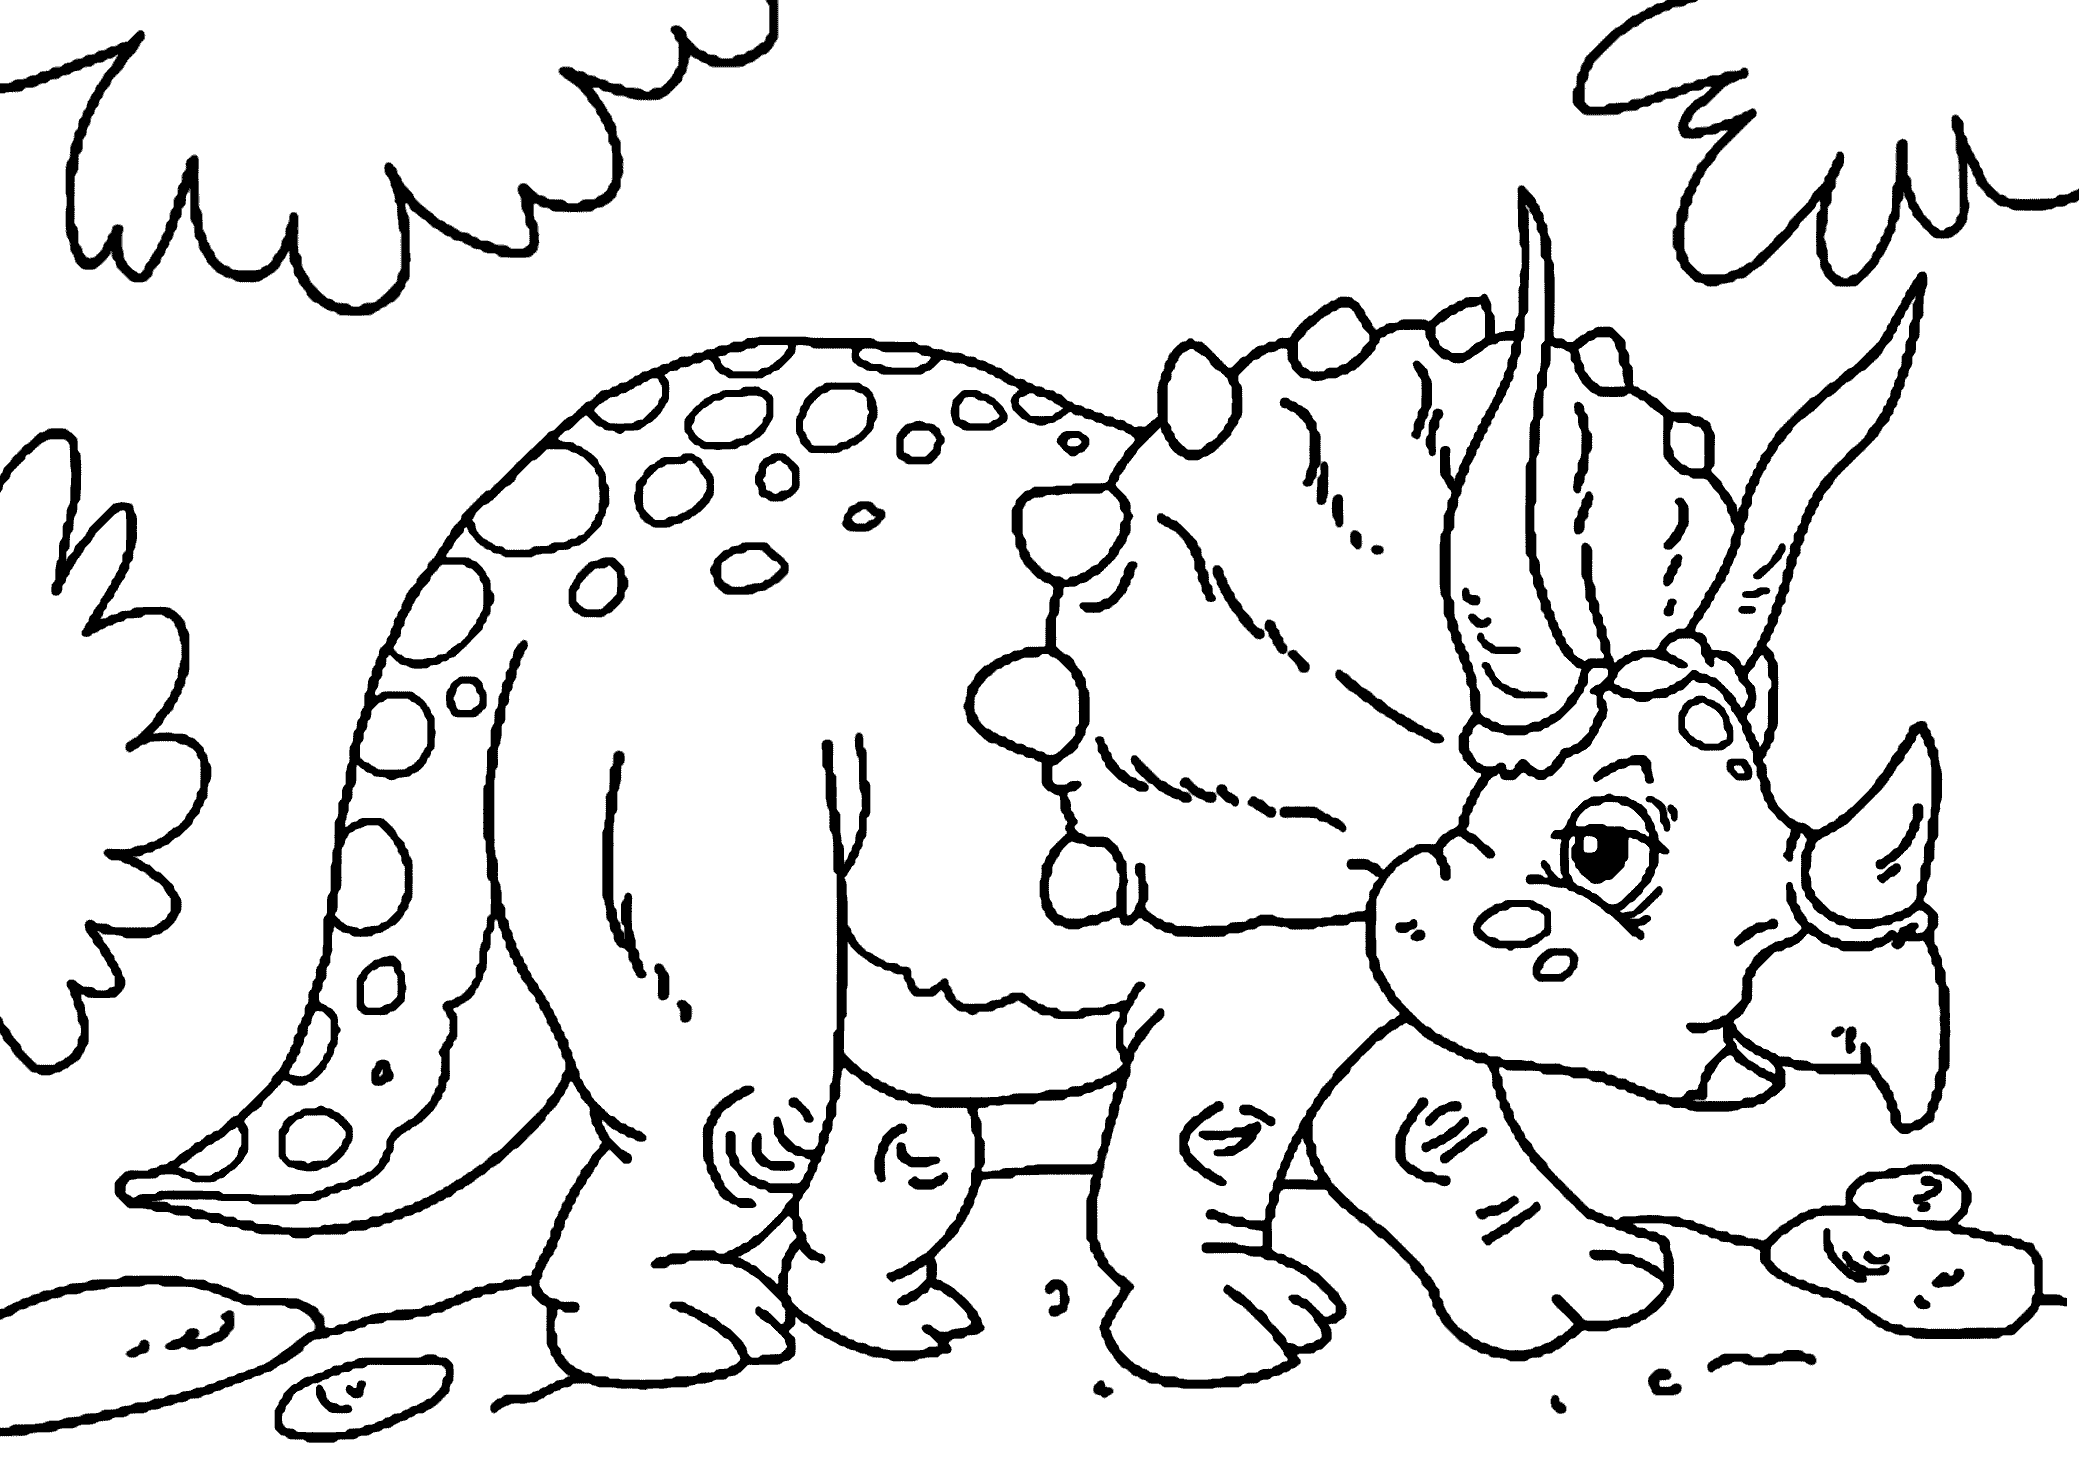 dinosaur color page cute little triceratops dinosaur coloring pages for kids page dinosaur color 